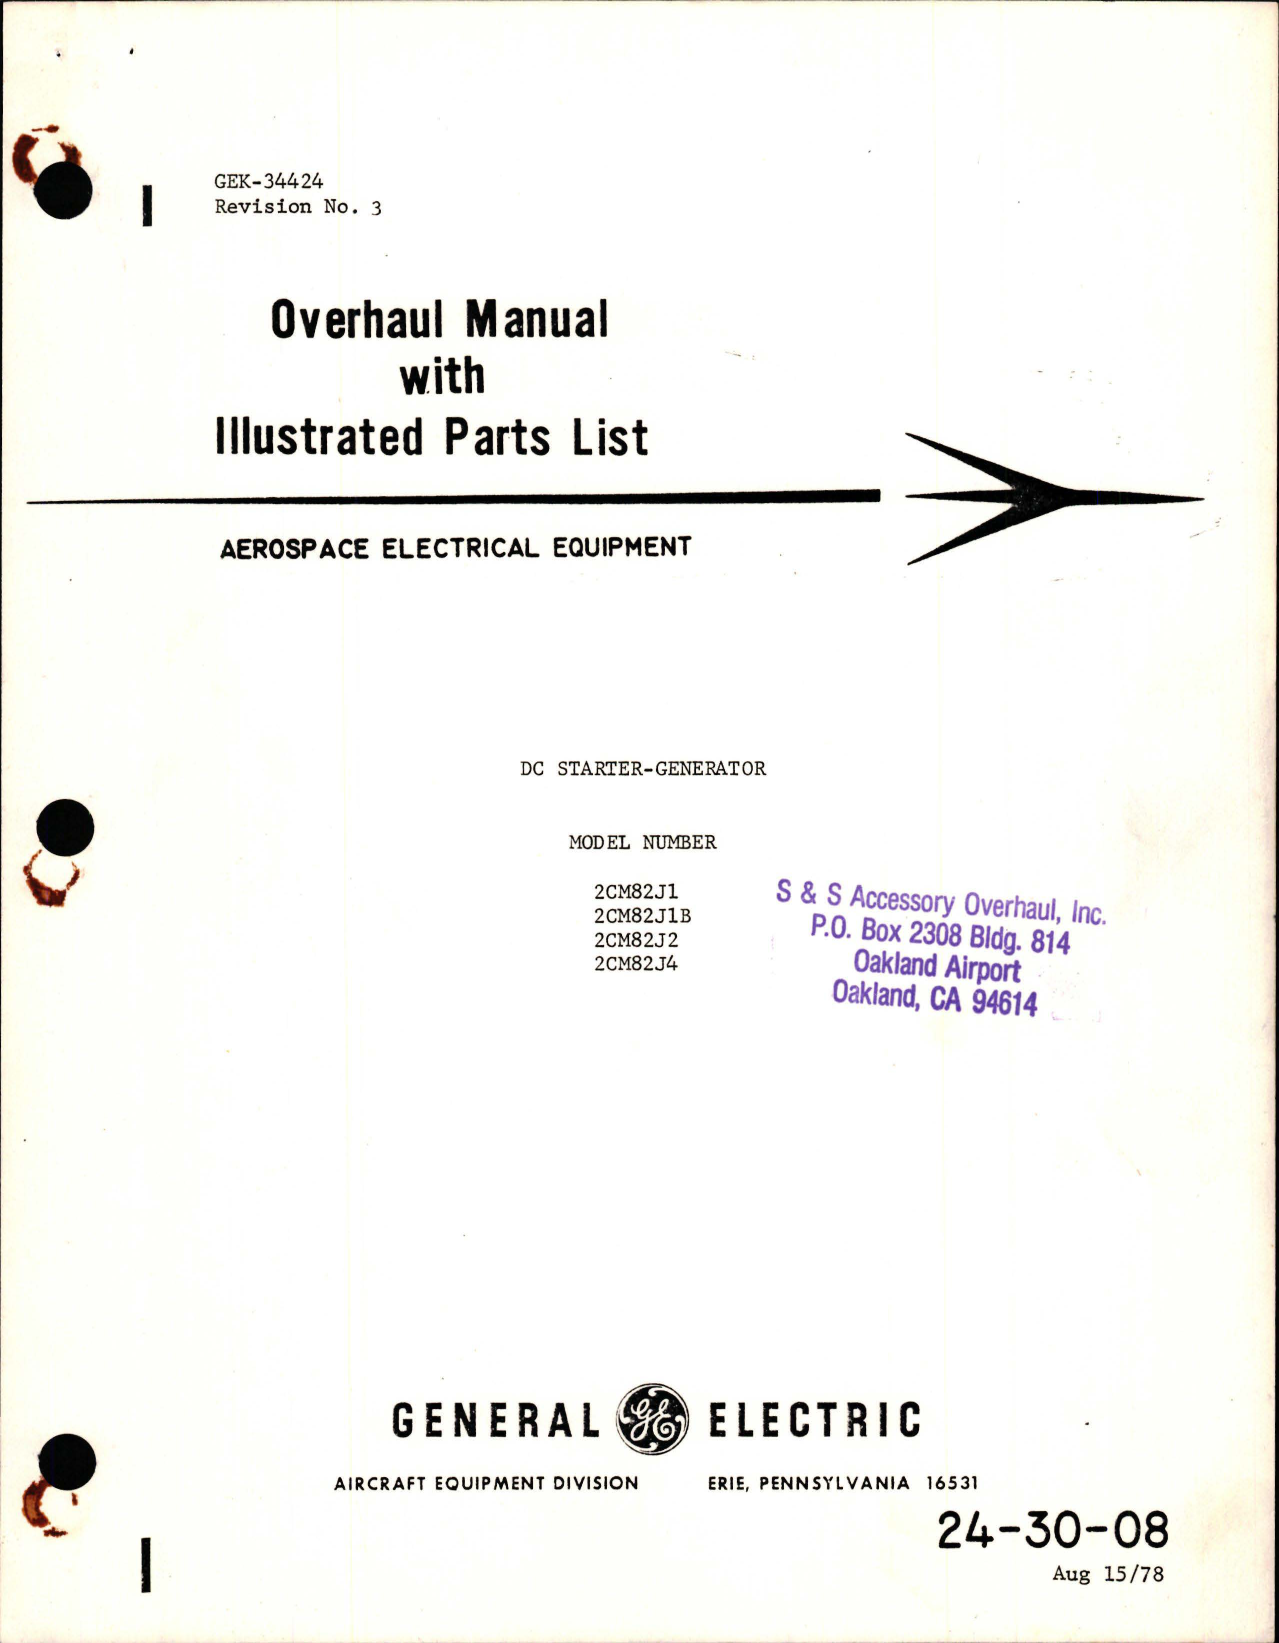 Sample page 1 from AirCorps Library document: Overhaul with Illustrated Parts List for DC Starter Generator - Models 2CM82J1, 2CM82J1B, 2CM82J2, and 2CM82J4 - Revision 3